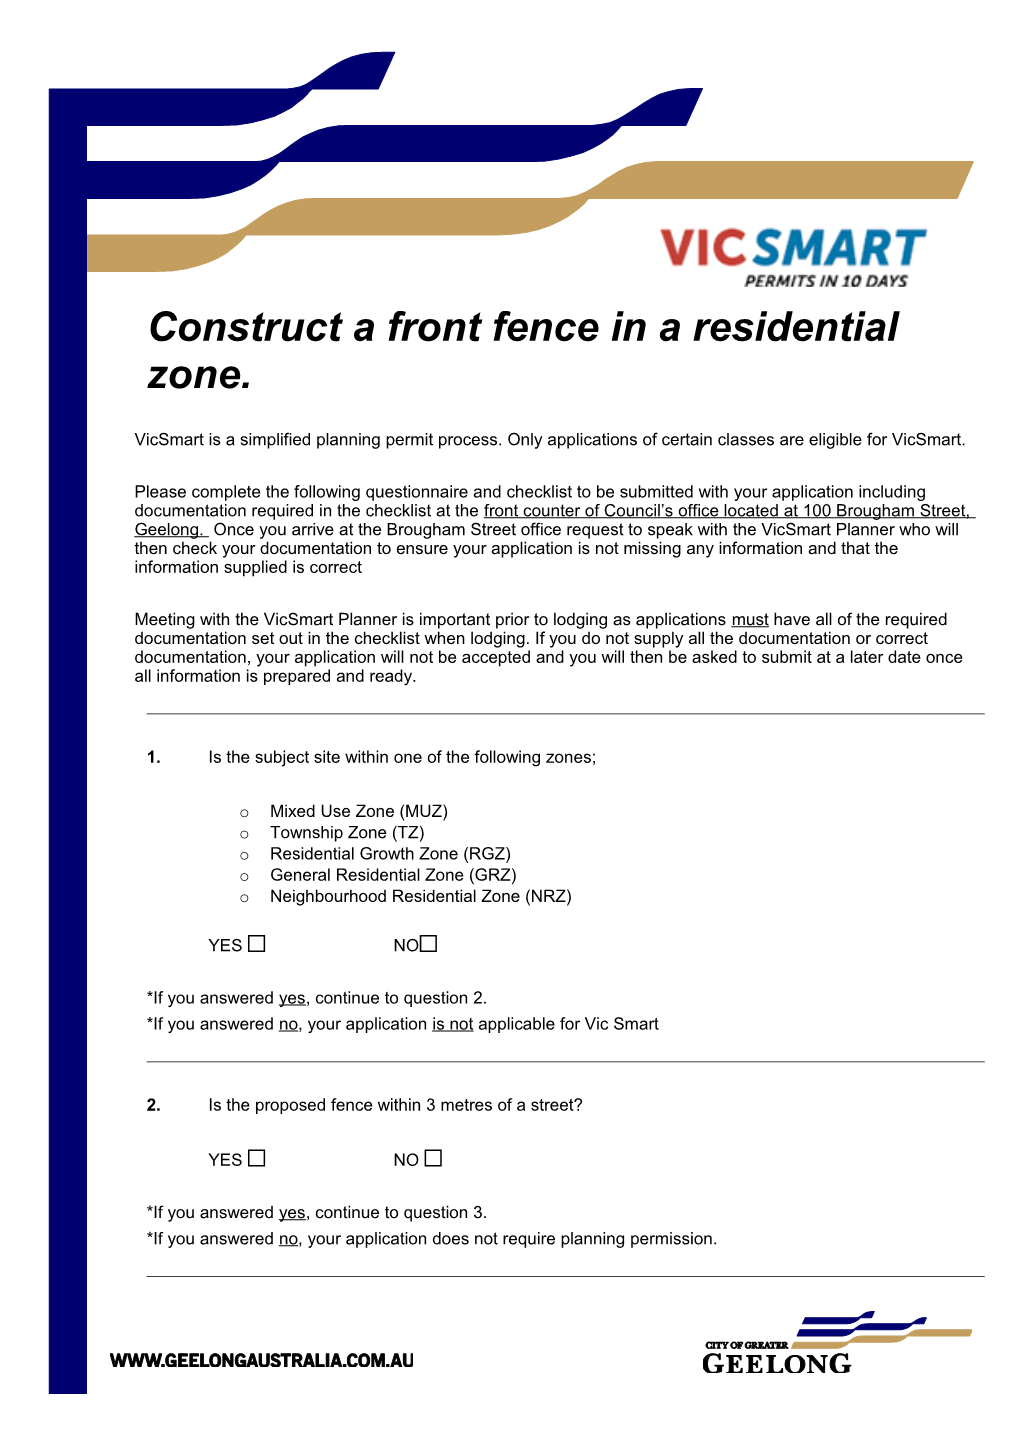 Construct a Front Fence in a Residential Zone